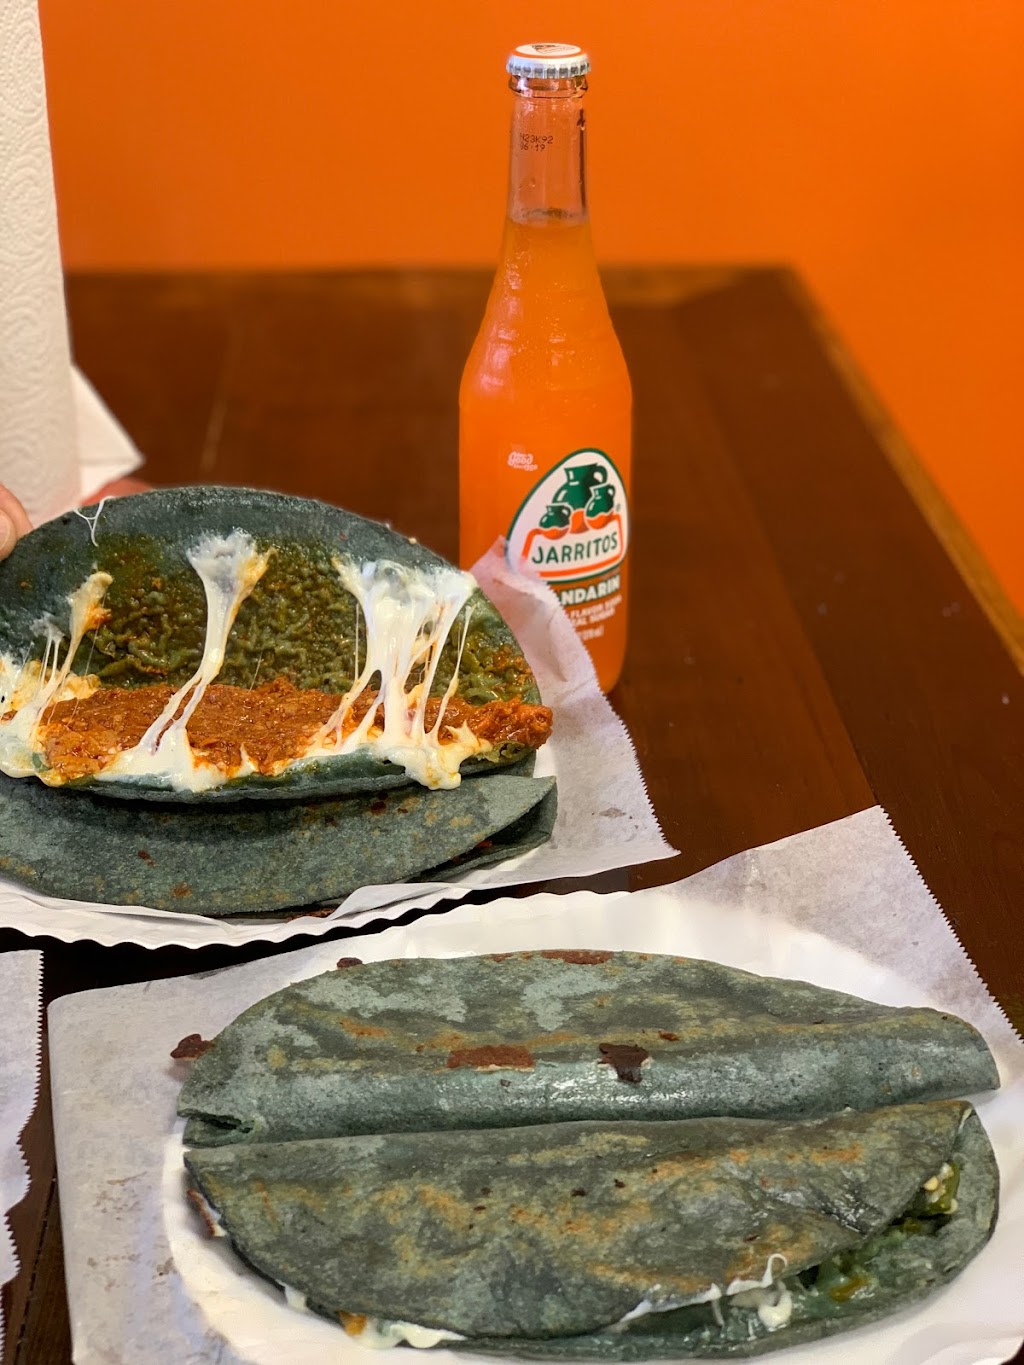 Las Chenchas Best Quesadillas in Texas | 8103 Airline Dr Suite 16, Houston, TX 77037, USA | Phone: (832) 830-6420